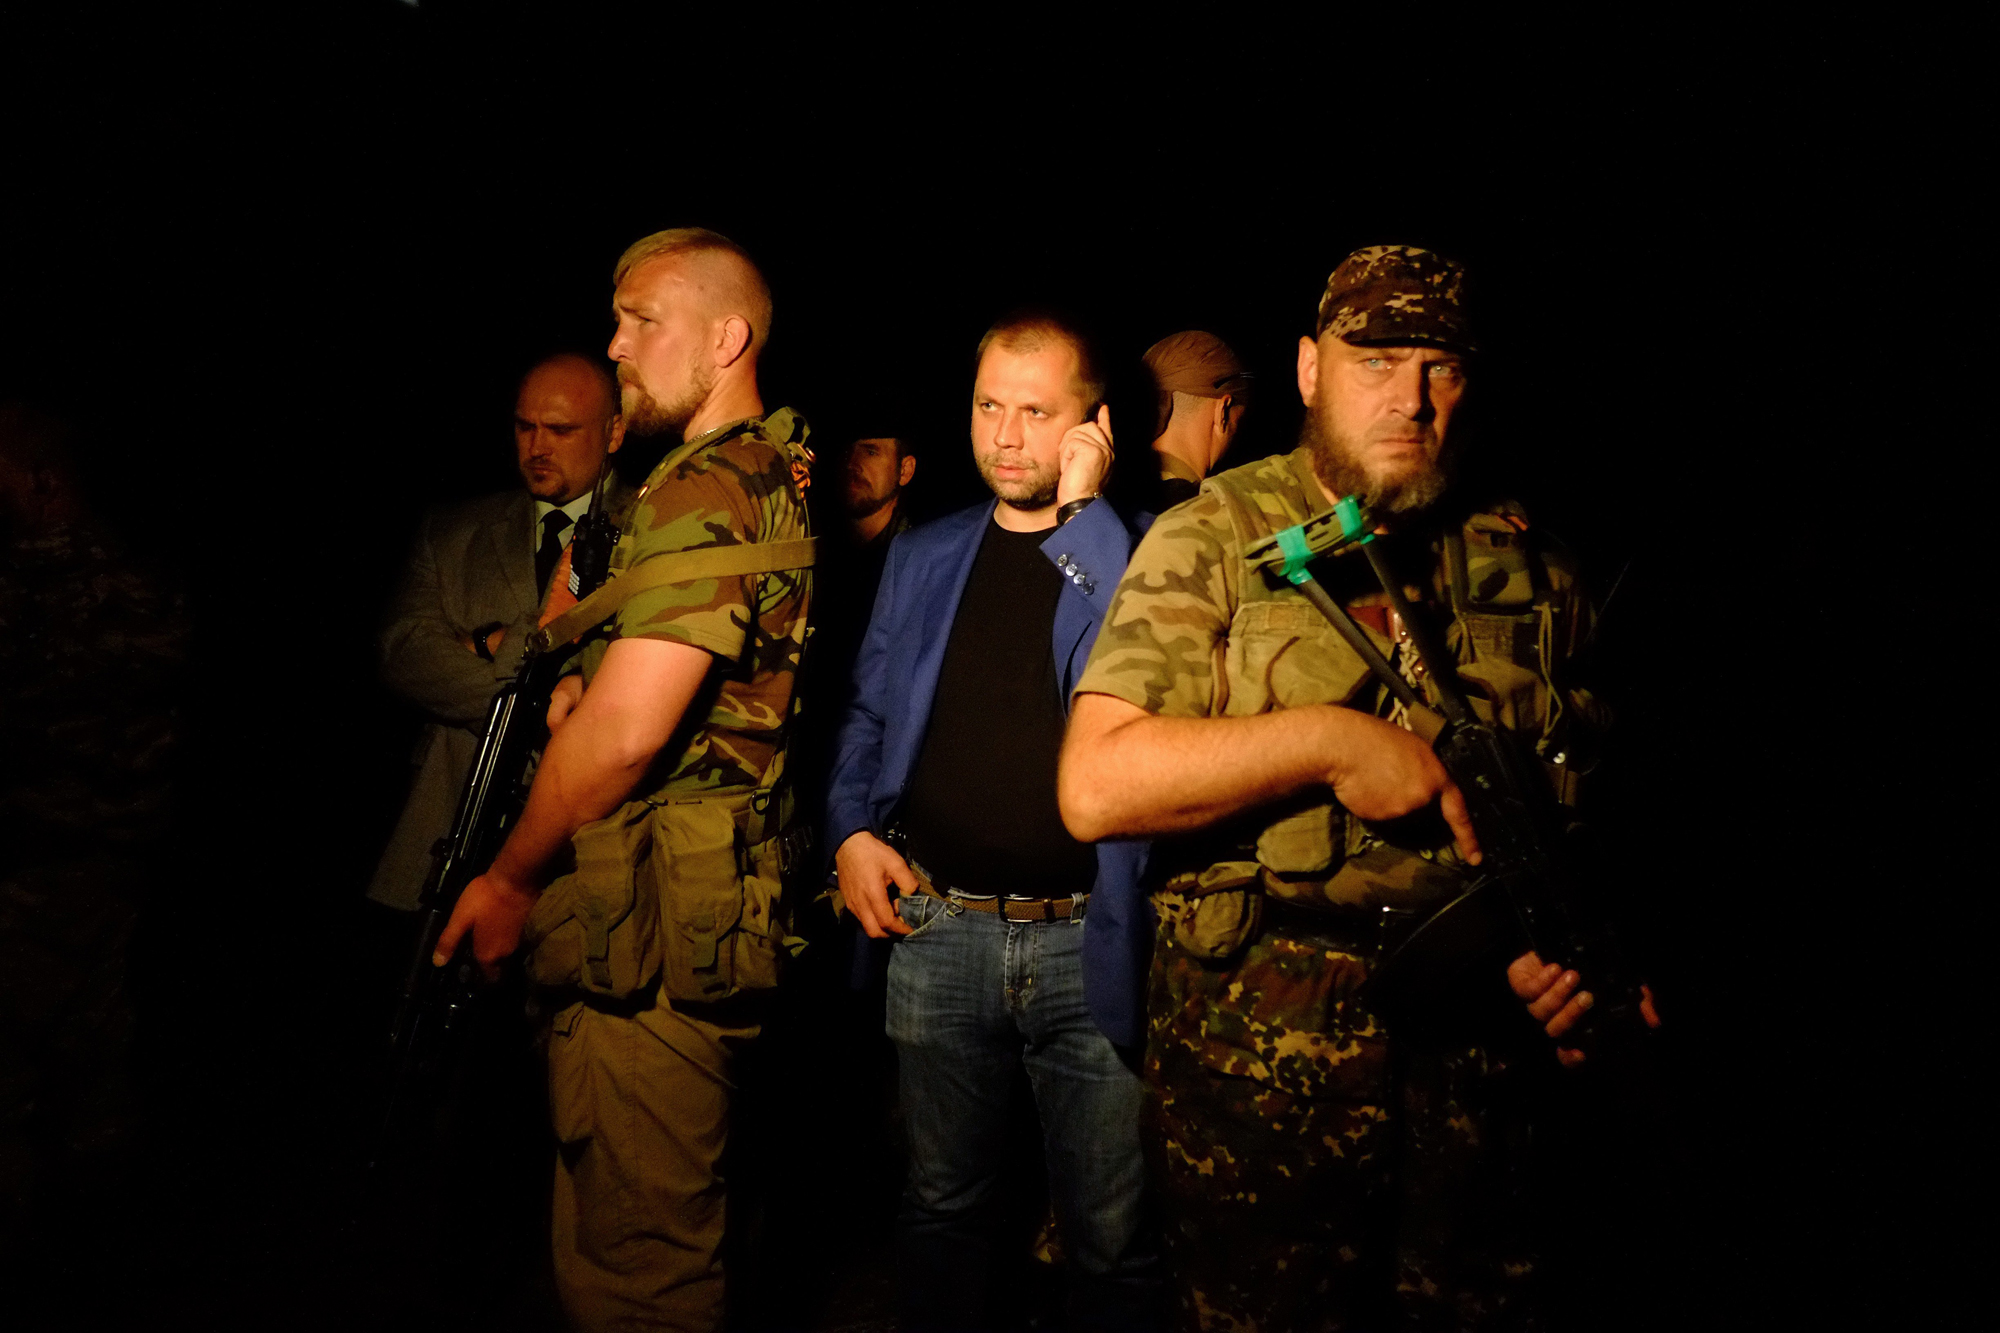 Self-proclaimed Prime Minister of the pro-Russian separatist "Donetsk People's Republic" Alexander Borodai stands as he arrives on the site of the crash of a malaysian airliner carrying 298 people from Amsterdam to Kuala Lumpur, near the town of Shaktarsk, in rebel-held east Ukraine, on July 17, 2014.